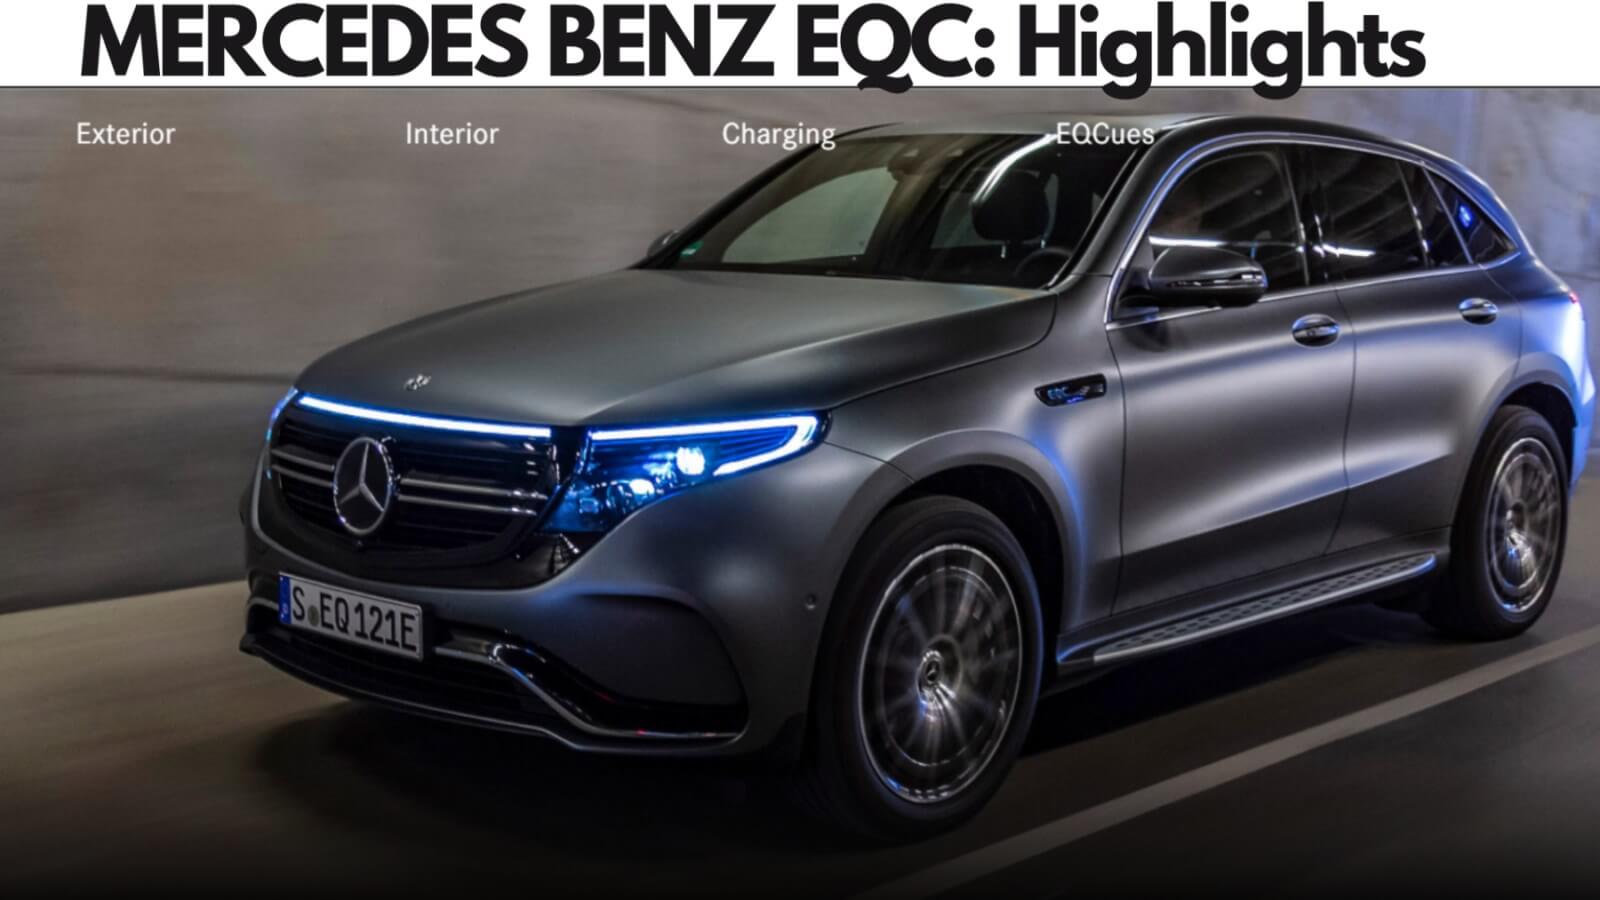 https://e-vehicleinfo.com/mercedes-benz-eqc-in-india-price-feature-highlights/